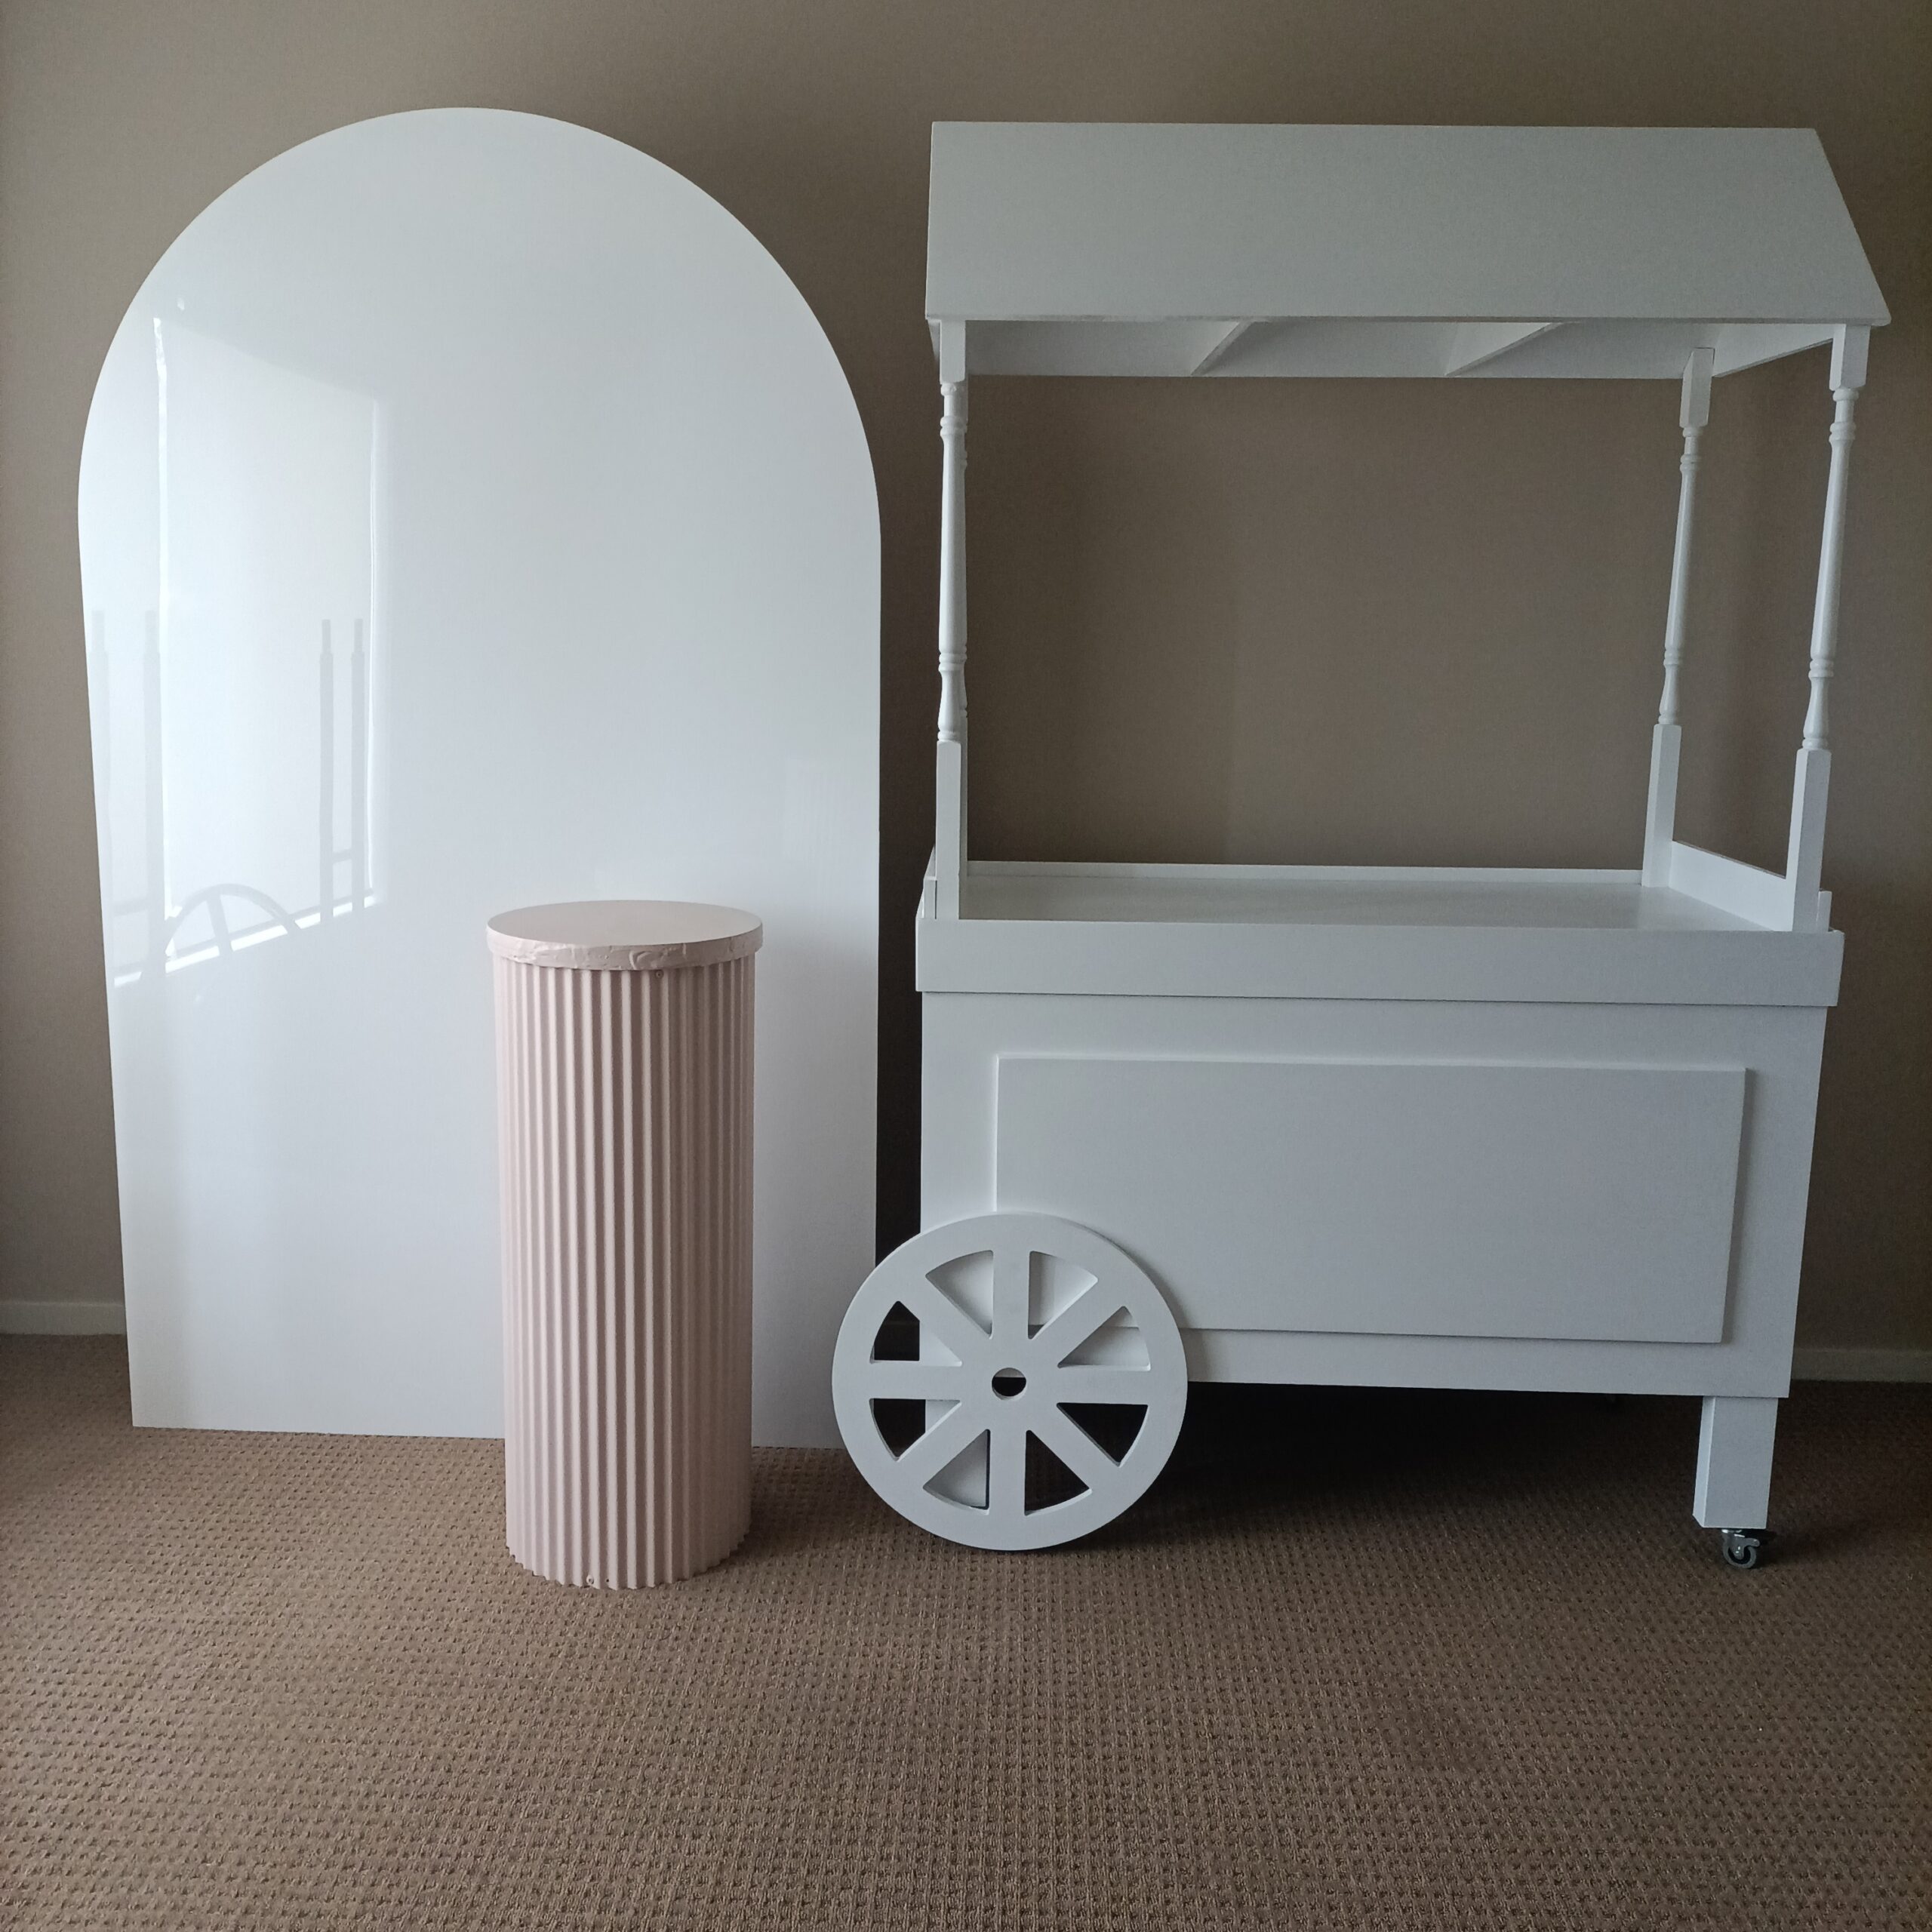 2. Acrylic Ripple Candy Cart Full Party Package